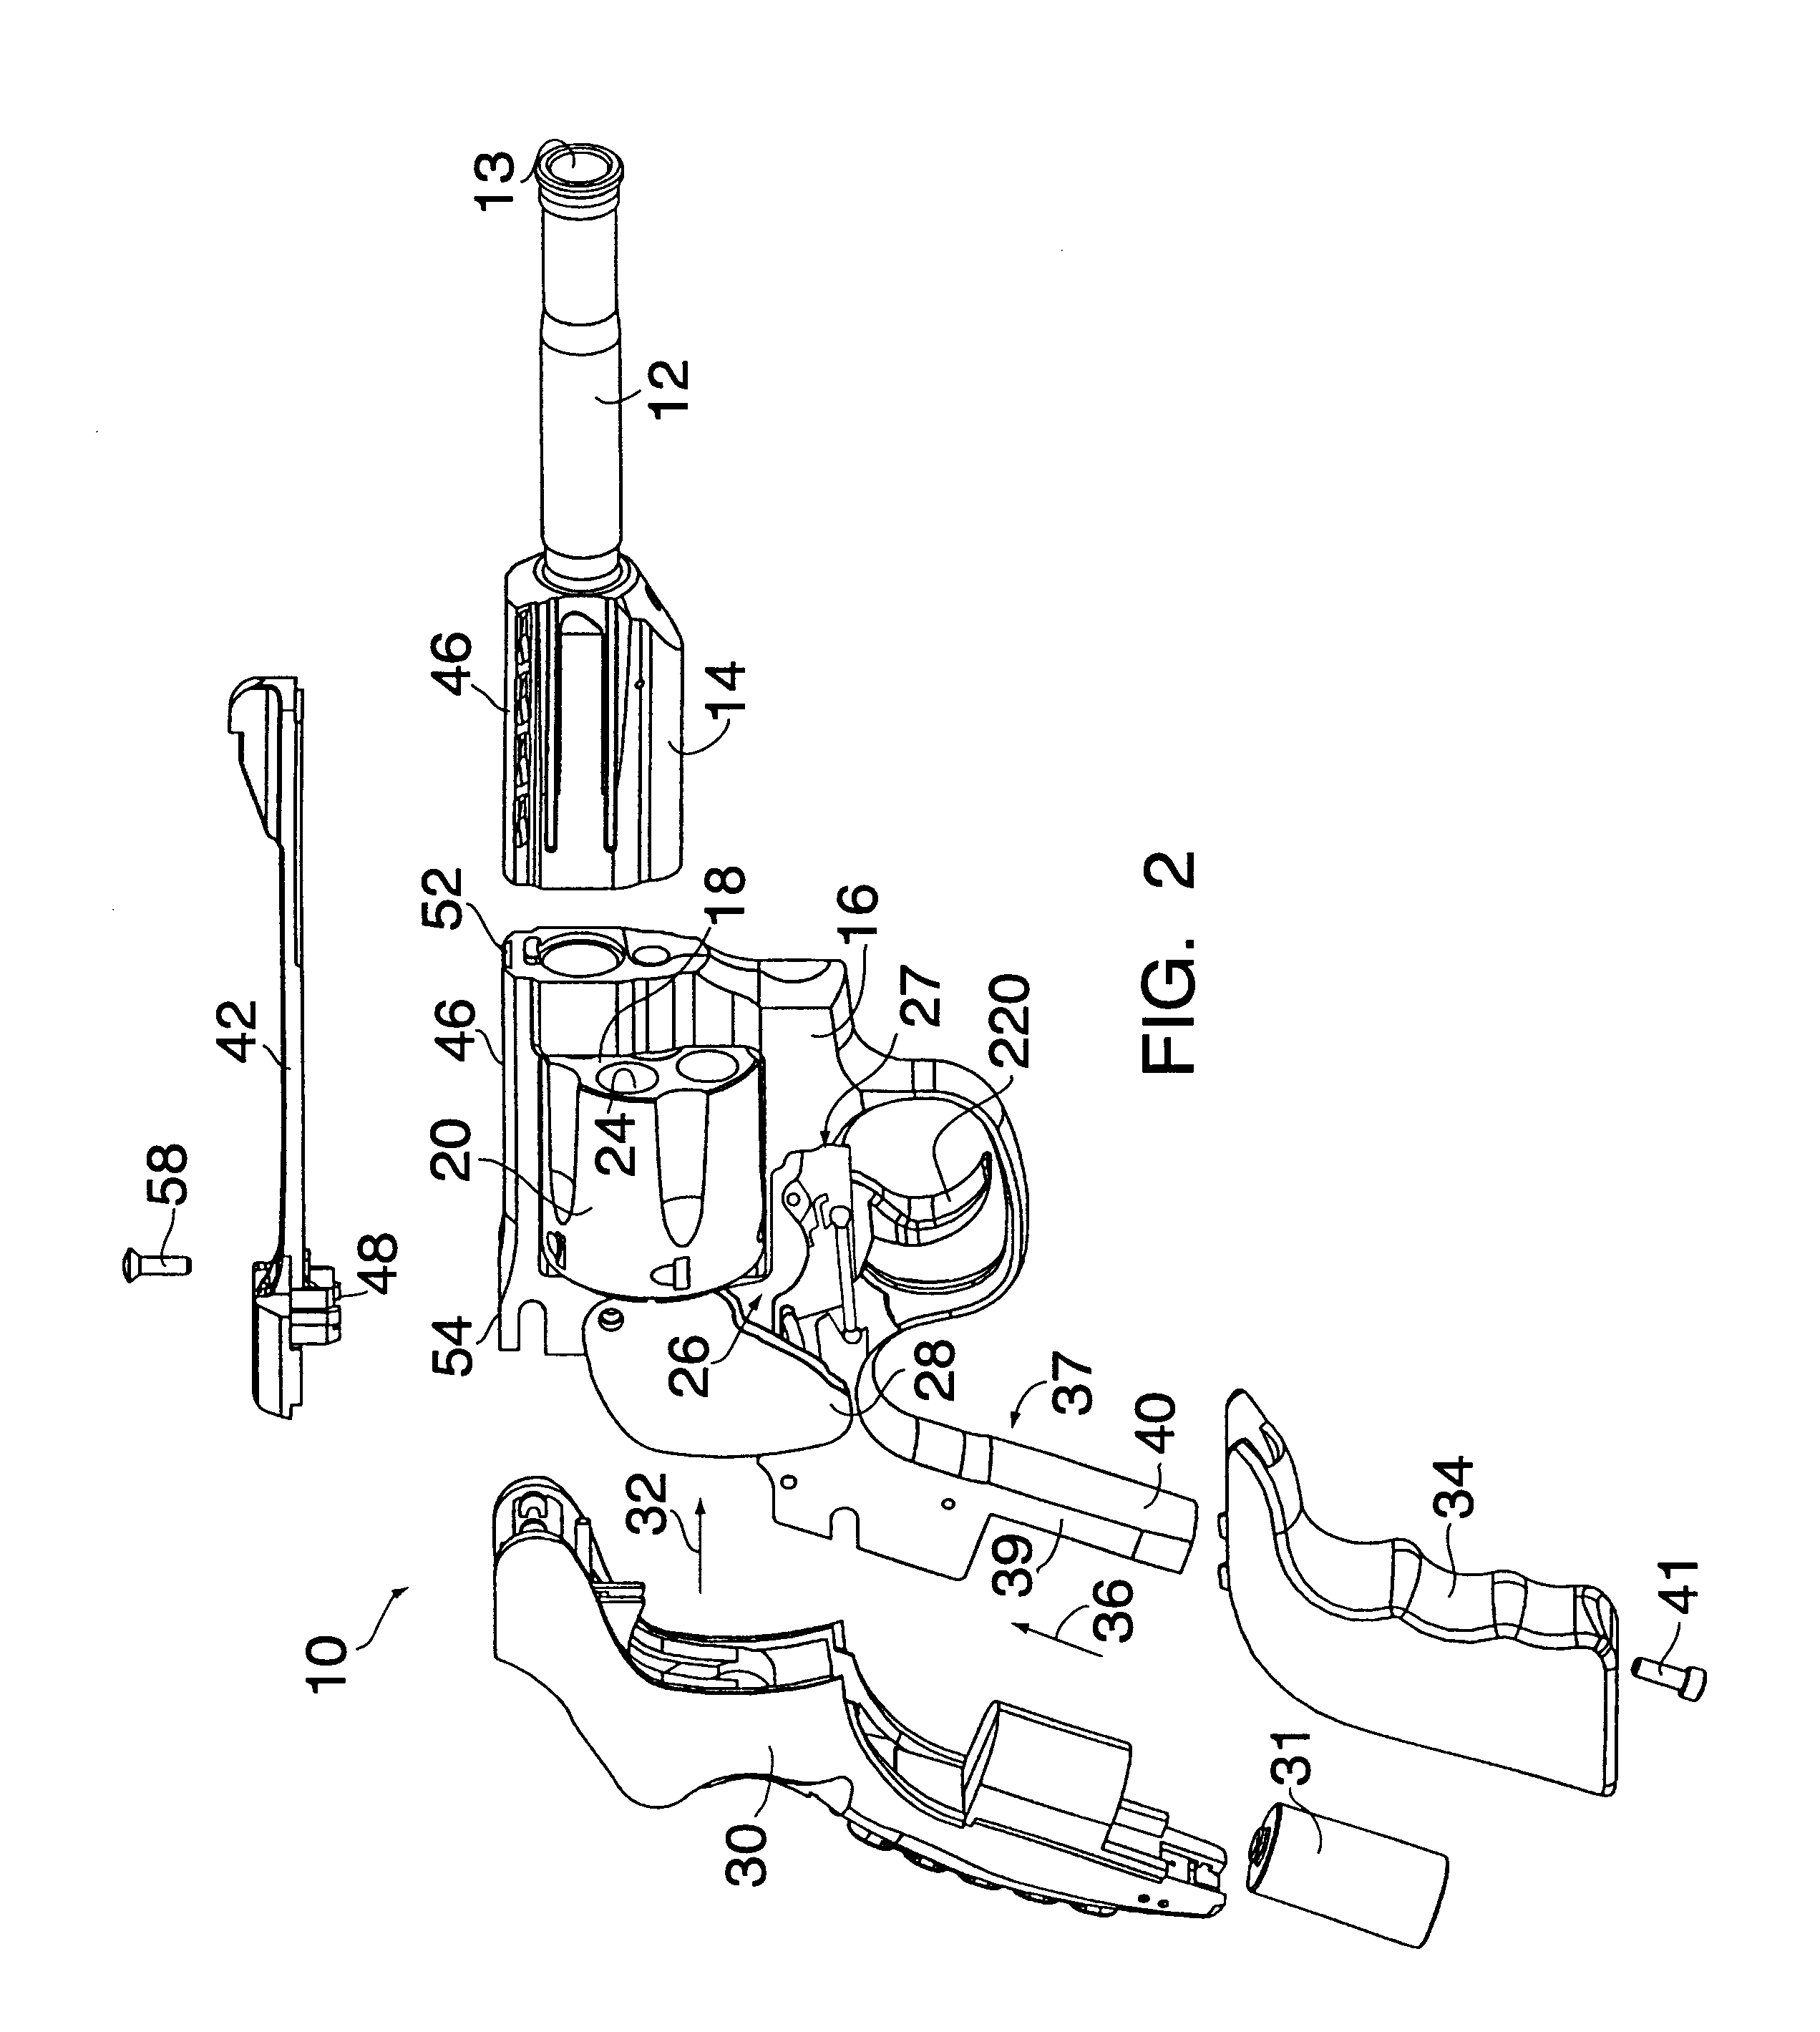 Security apparatus for authorizing use of a non-impact firearm